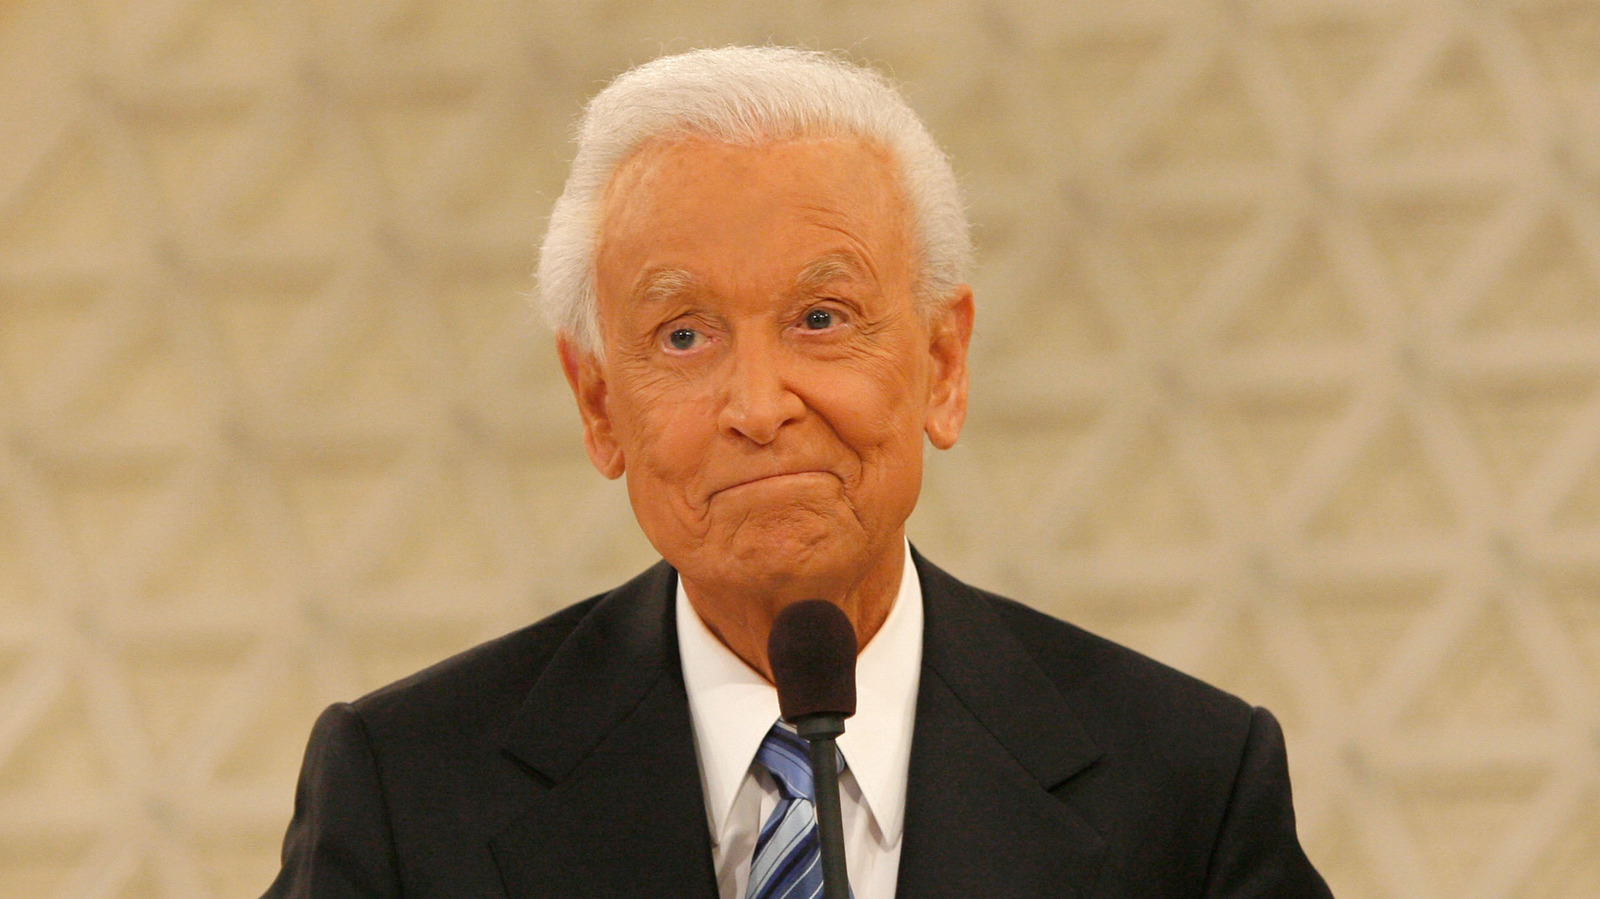 The Memorable The Price Is Right Moment That 'Humiliated' Bob Barker